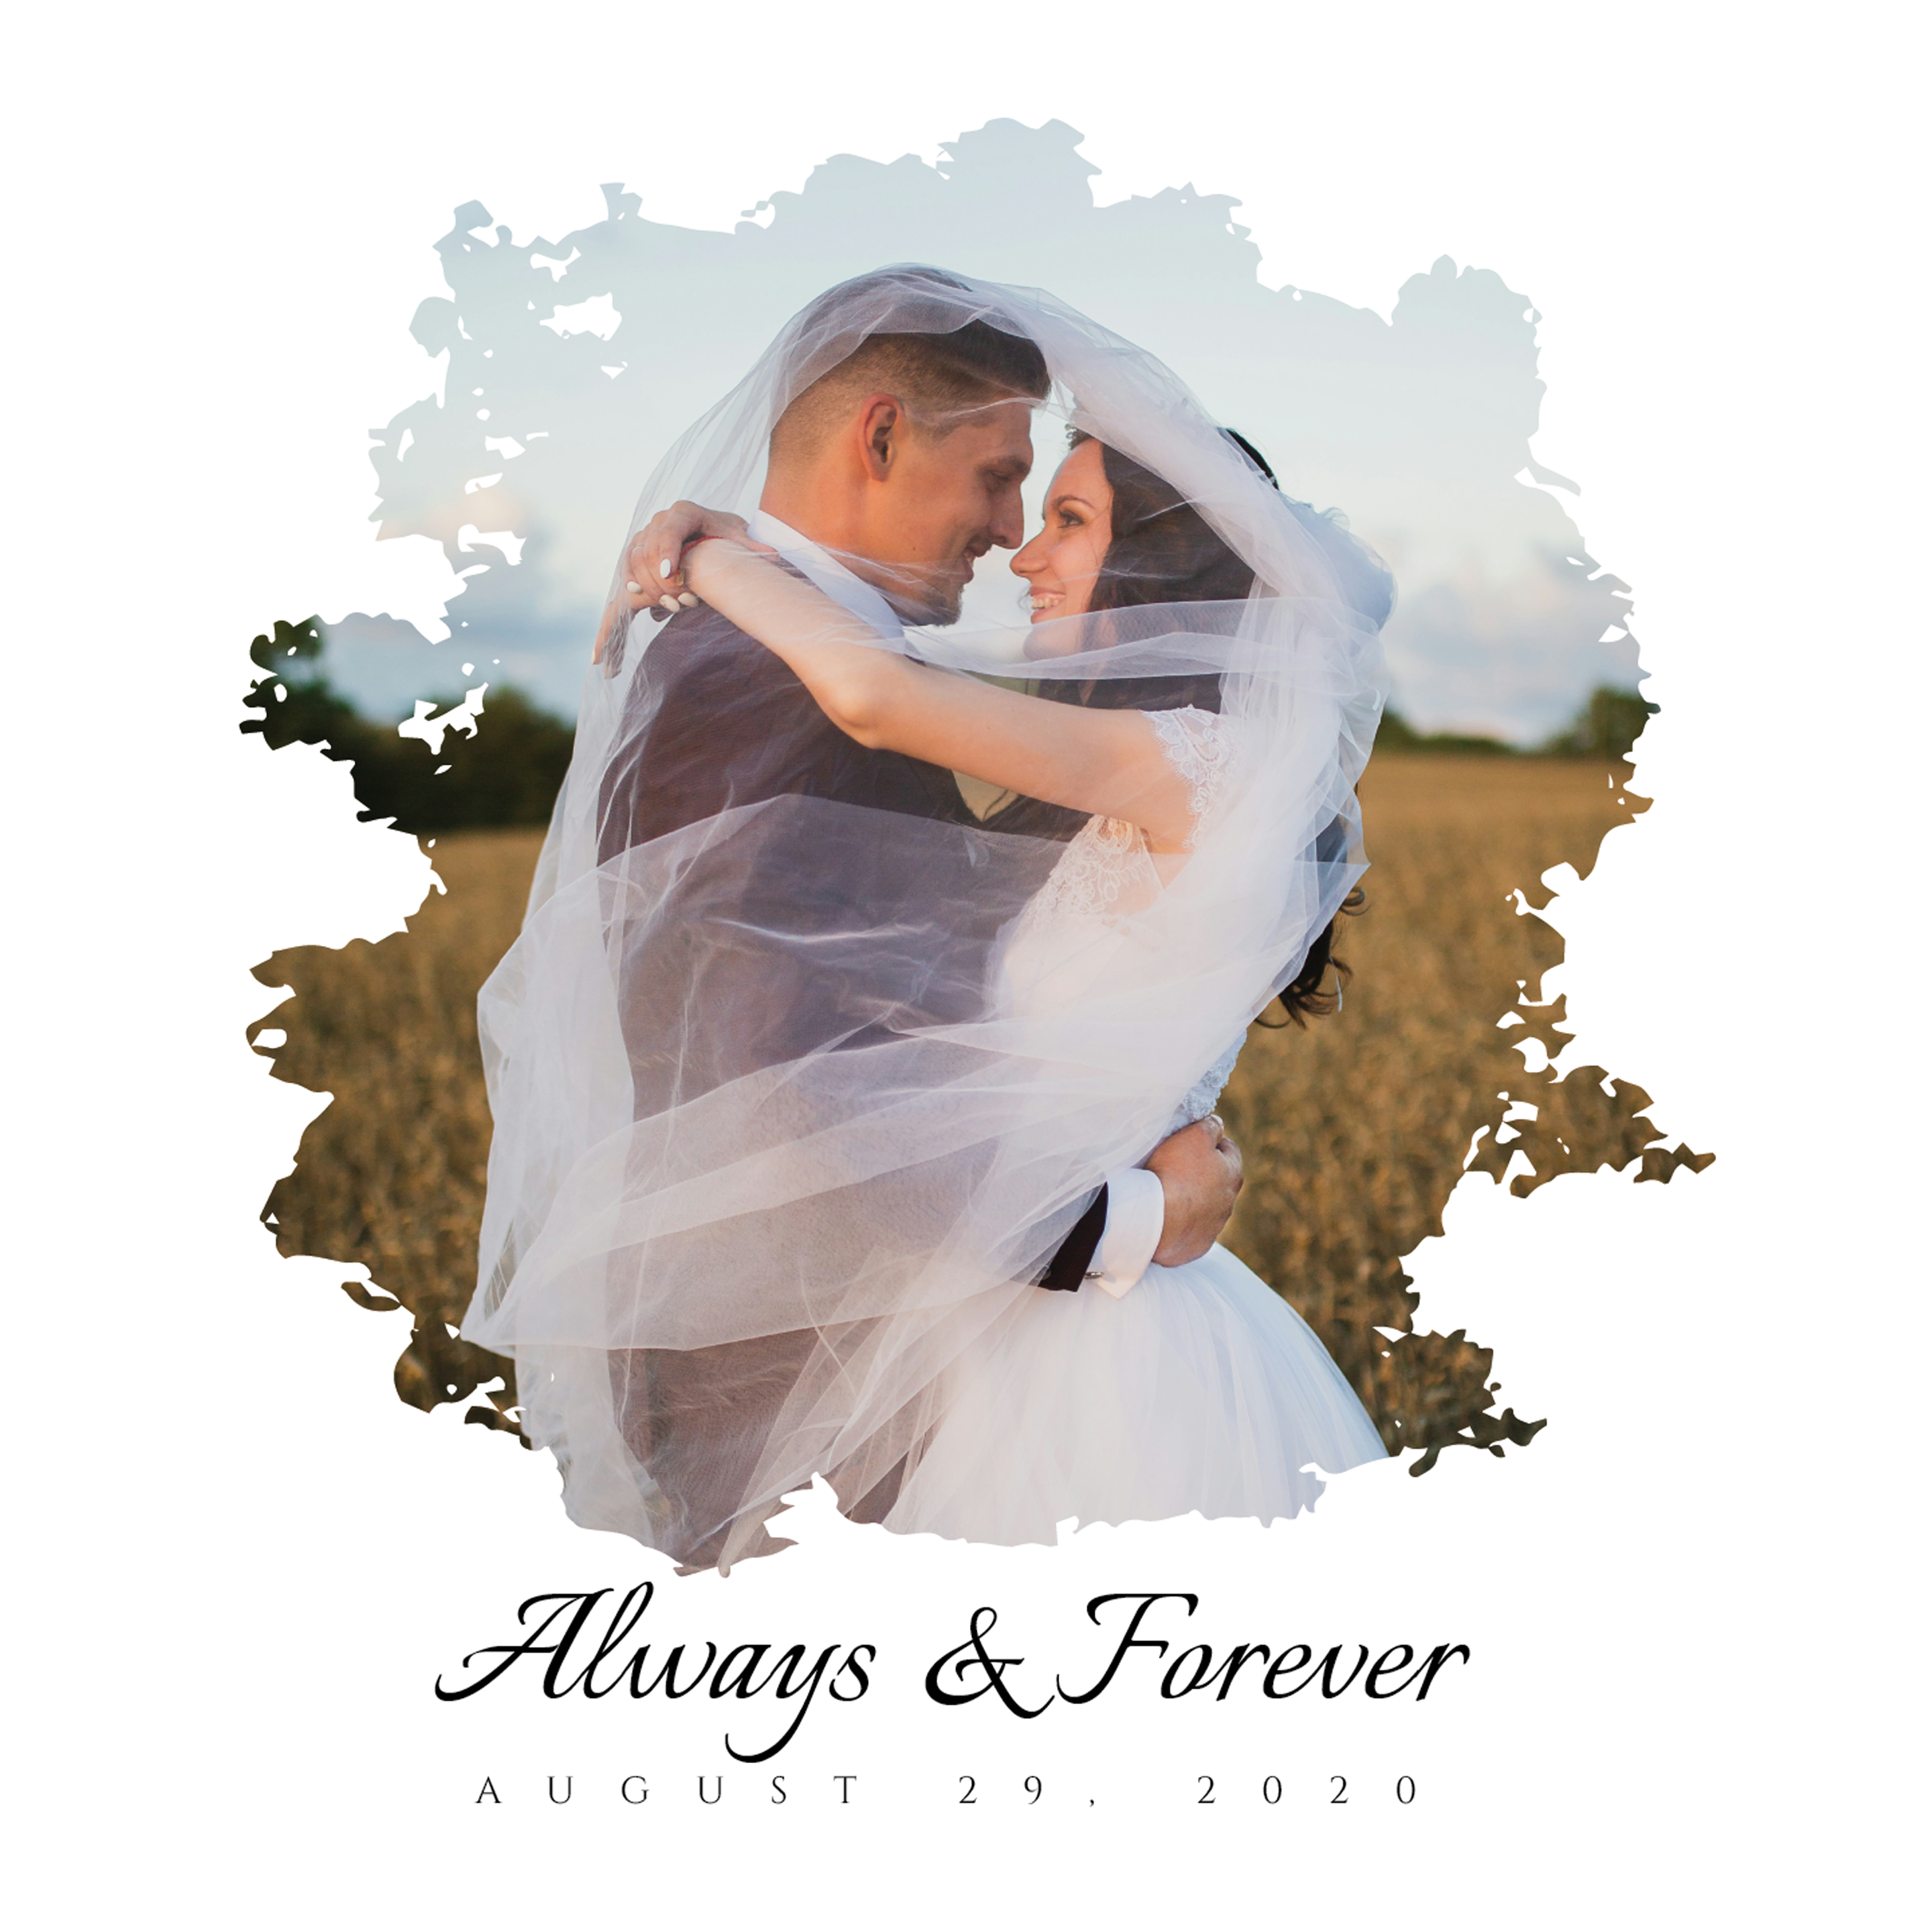 always-and-forever-photo-upload-design-theme